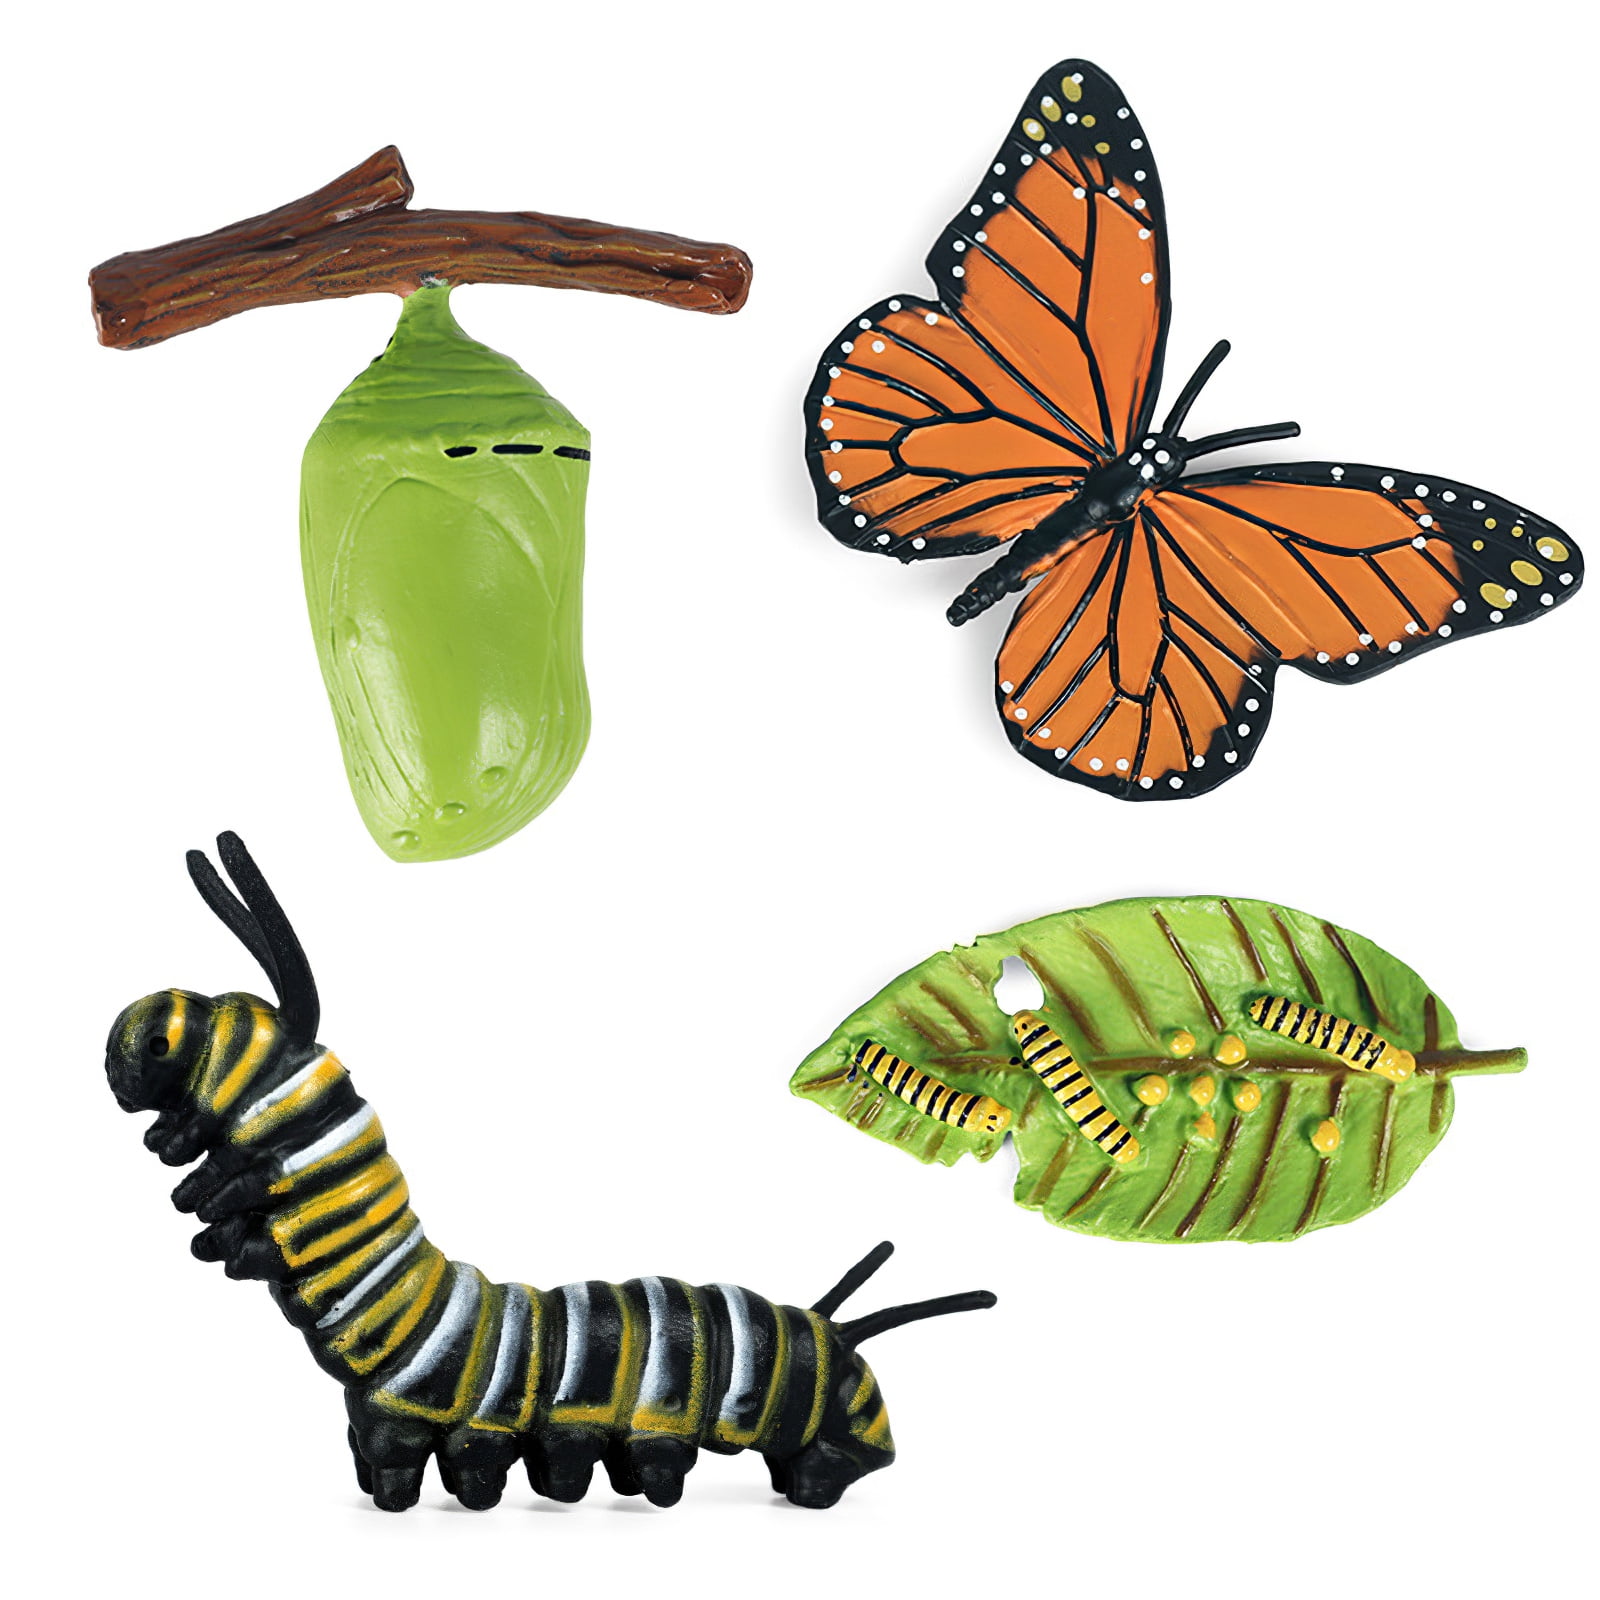 12 Pieces Lifelike Insects Figurines Butterfly Model Science & Nature Toys 